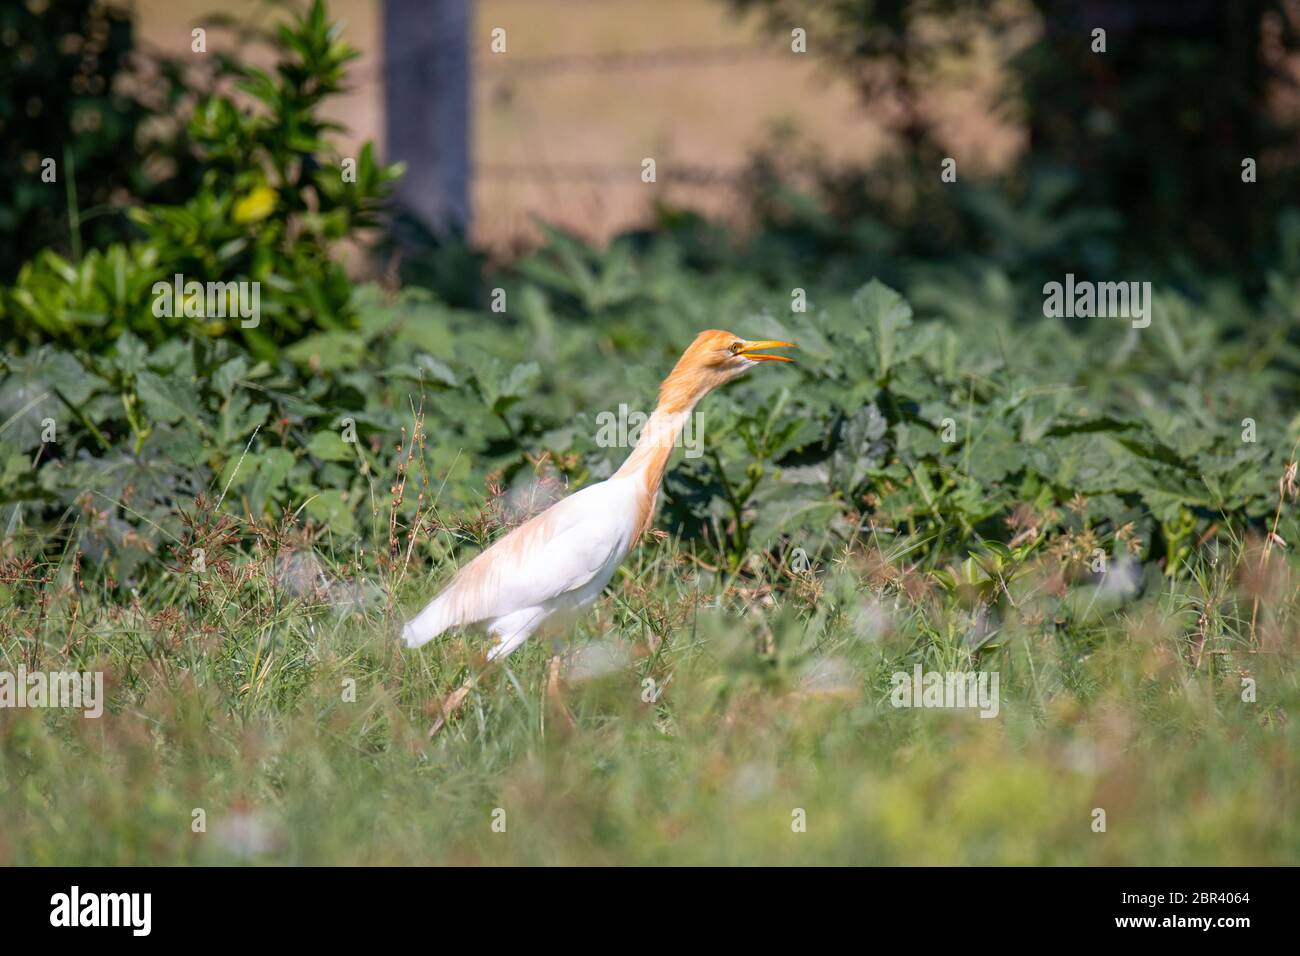 Closeup shot of  a Yellow Heron Bird known as Eastern cattle egret or Bubulcus Stock Photo